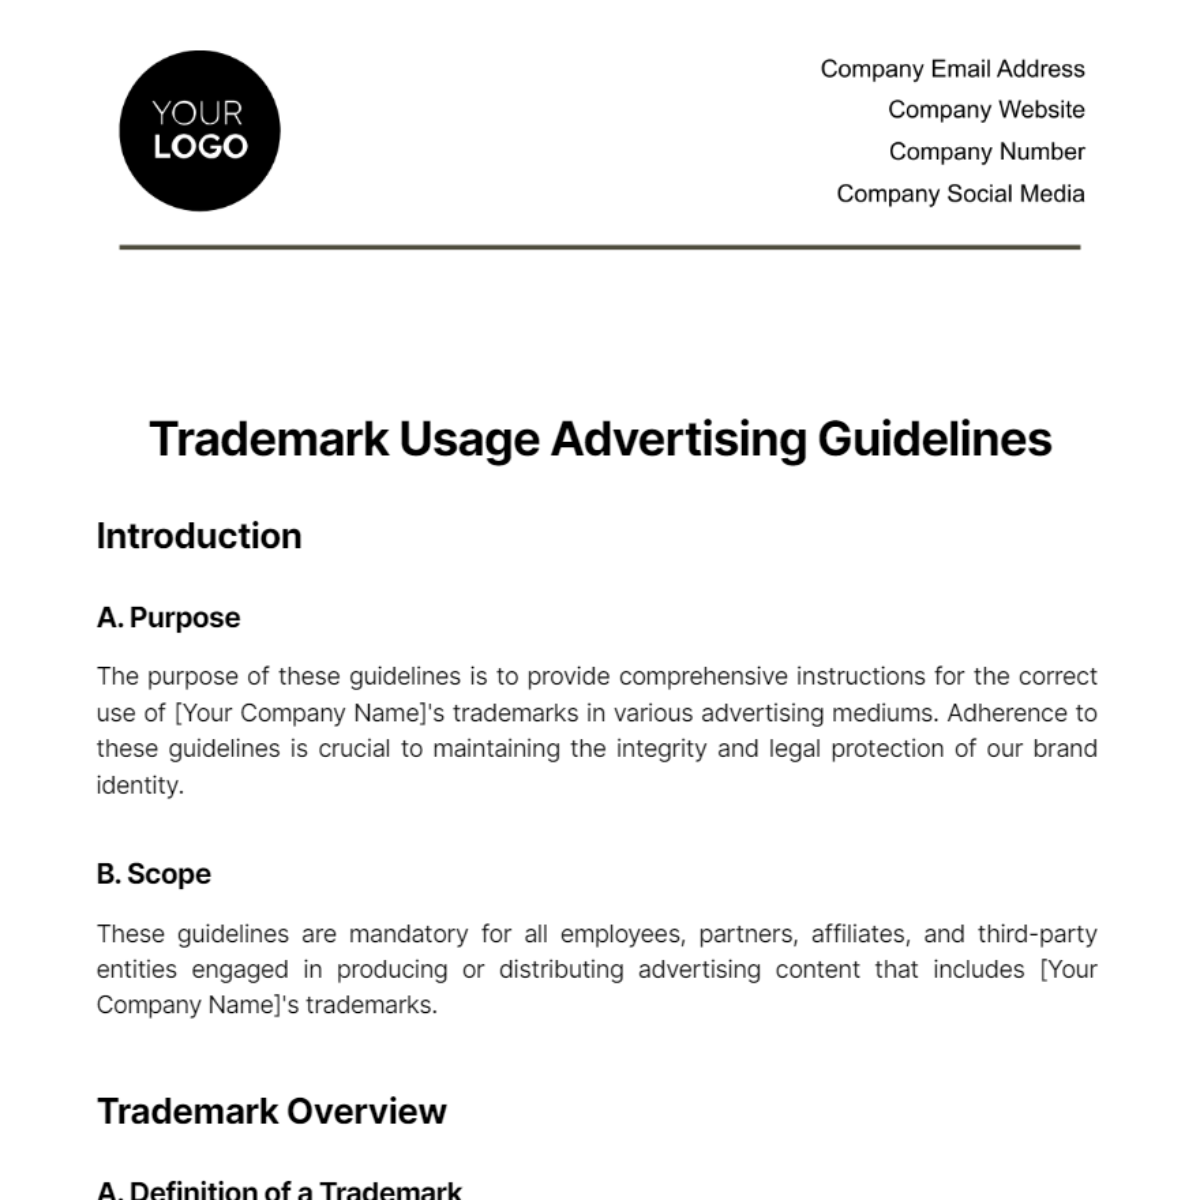 Trademark Usage Advertising Guidelines Template